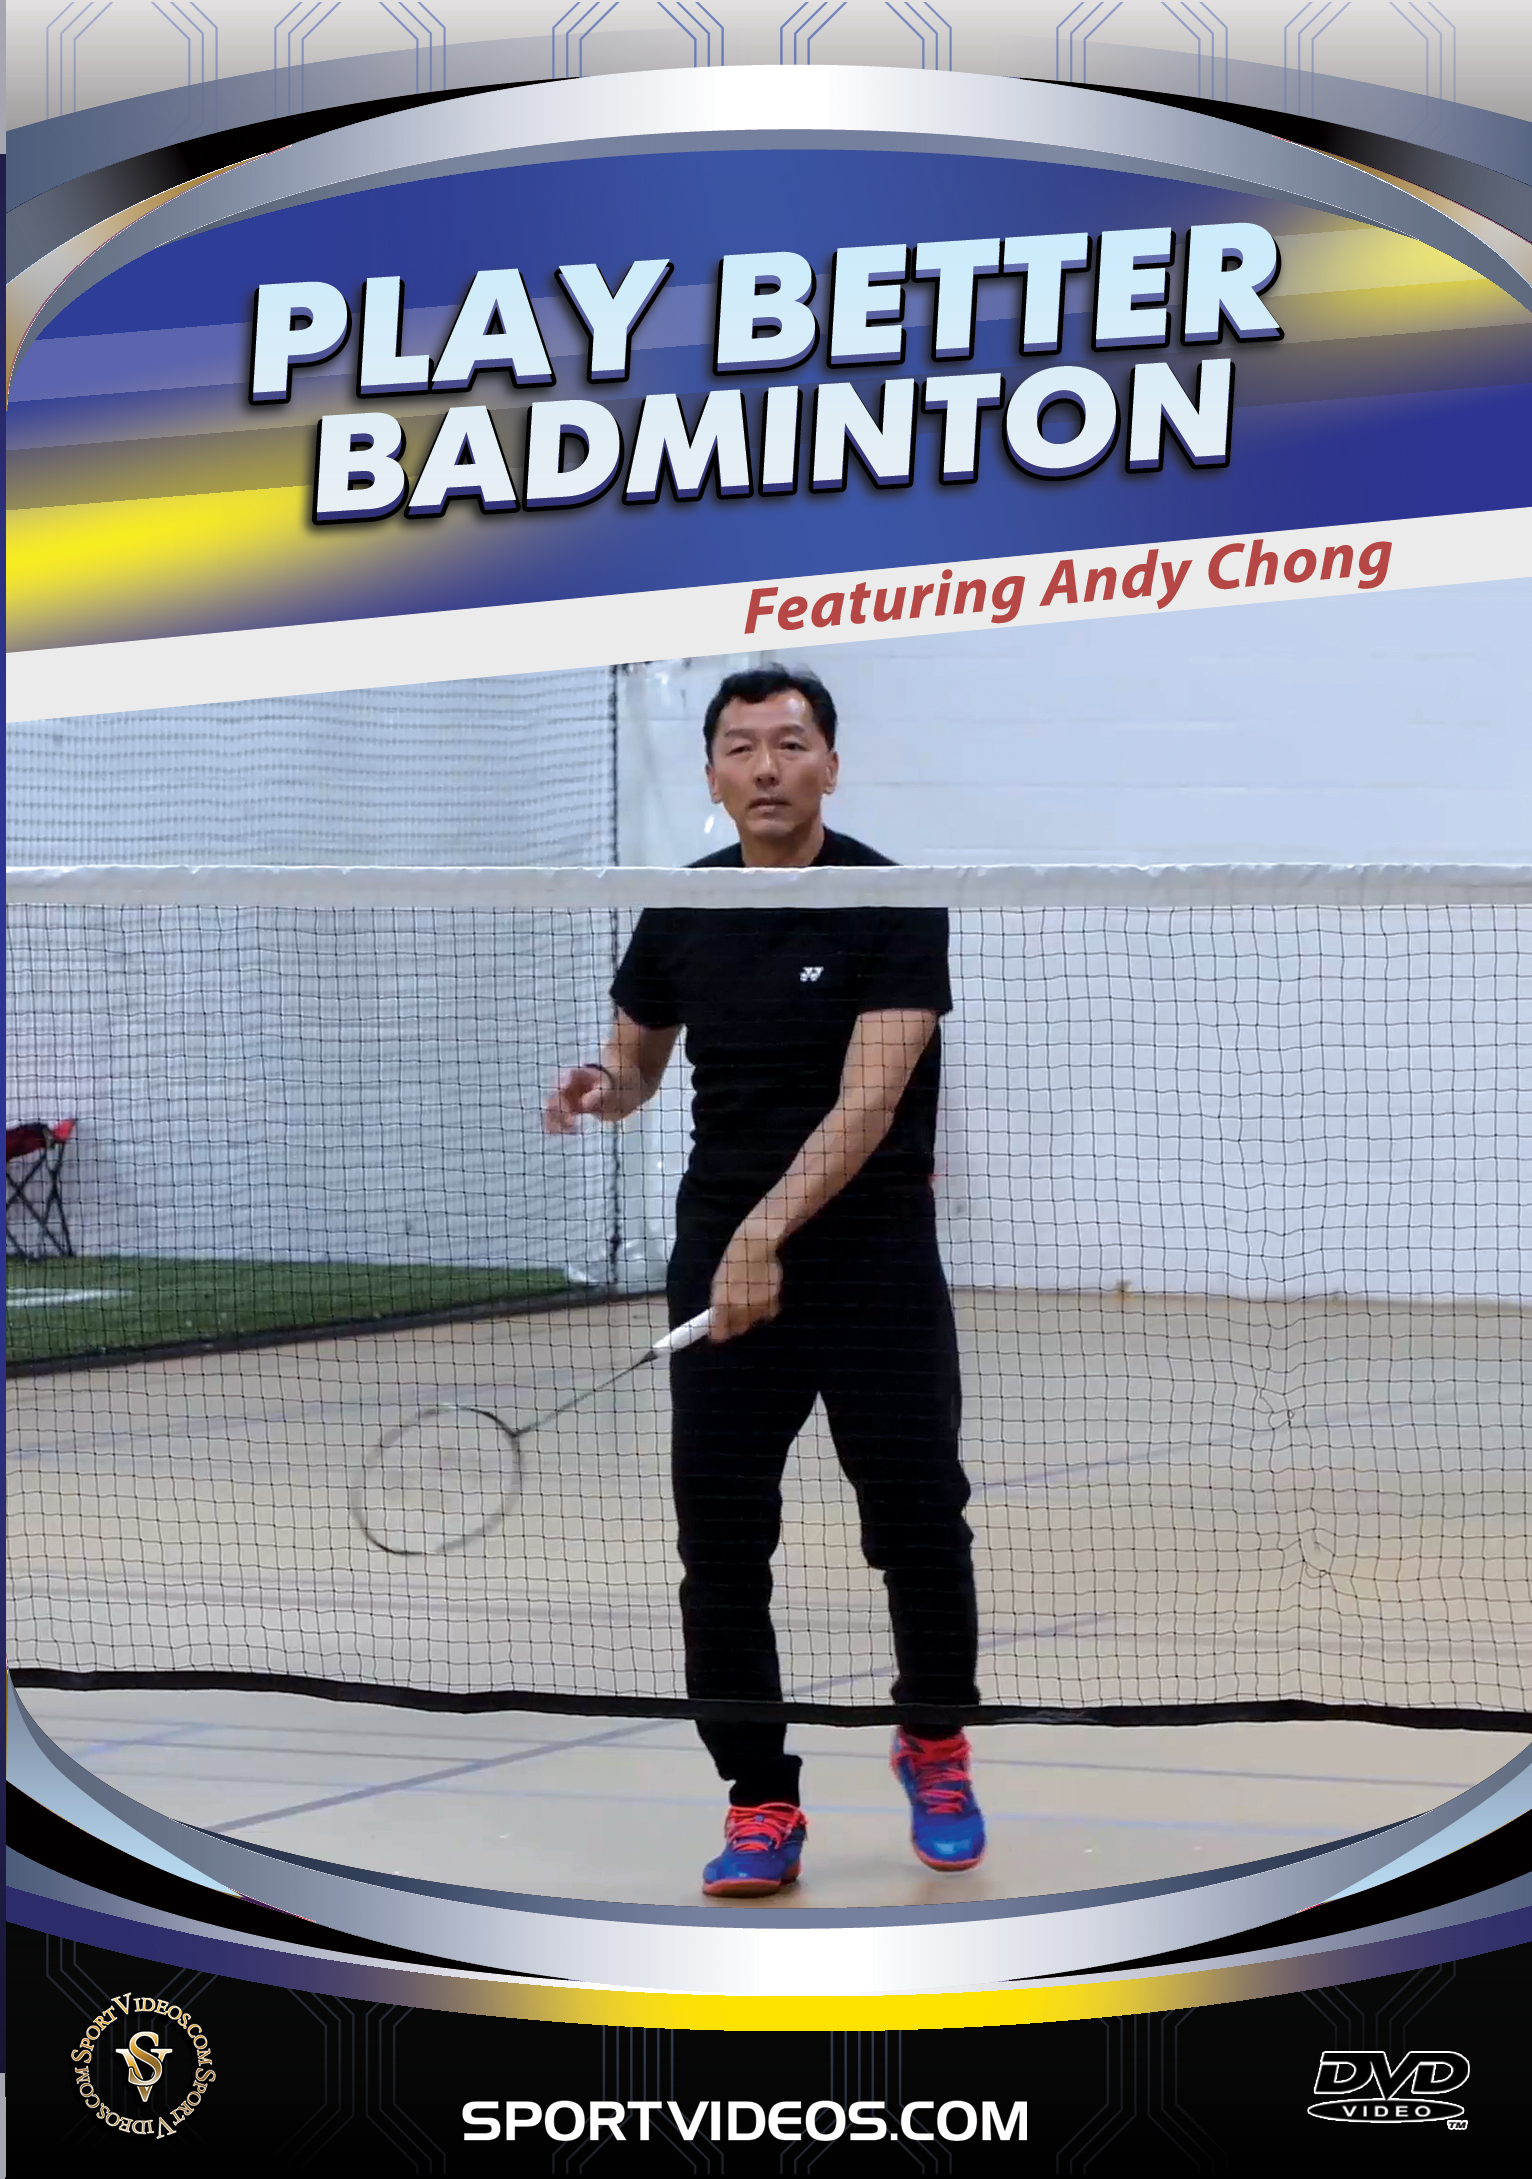 Play Better Badminton DVD or Download